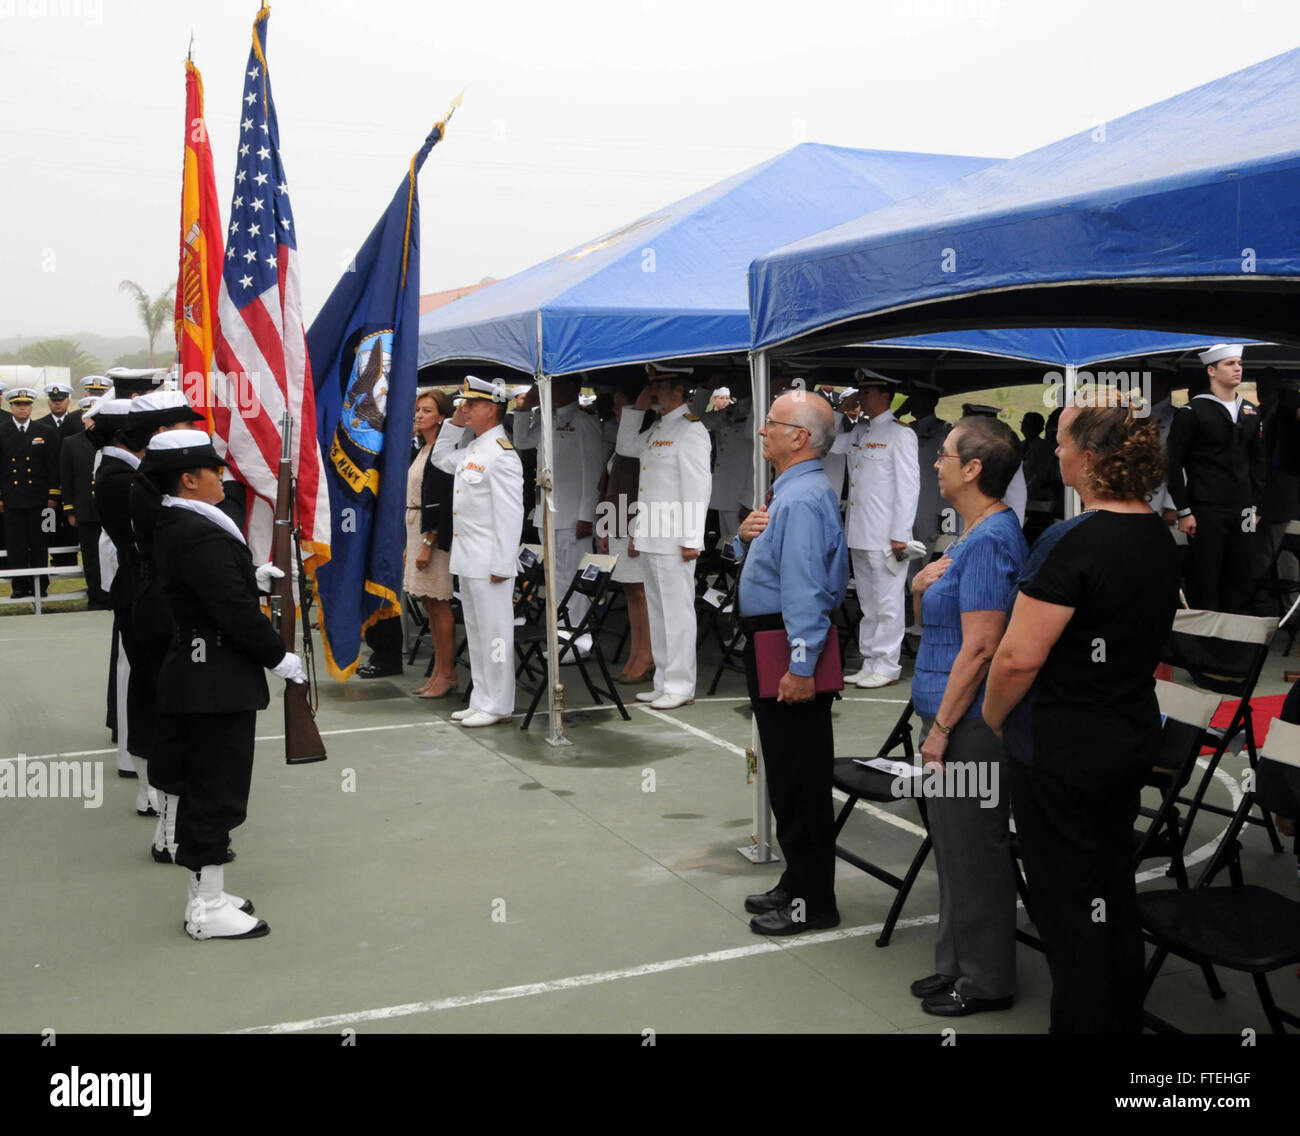 NAVAL STATION ROTA, Spain (October 17, 2014) – U.S. Navy and Spanish navy color guard members present arms during USS Donald Cook (DDG 75) change of command ceremony, Oct. 17. Donald Cook is the first of four Arleigh Burke-class destroyers to be forward-deployed to Rota, Spain, as part of the President's European Phased Adaptive Approach (EPAA) to ballistic missile defense in Europe. Stock Photo